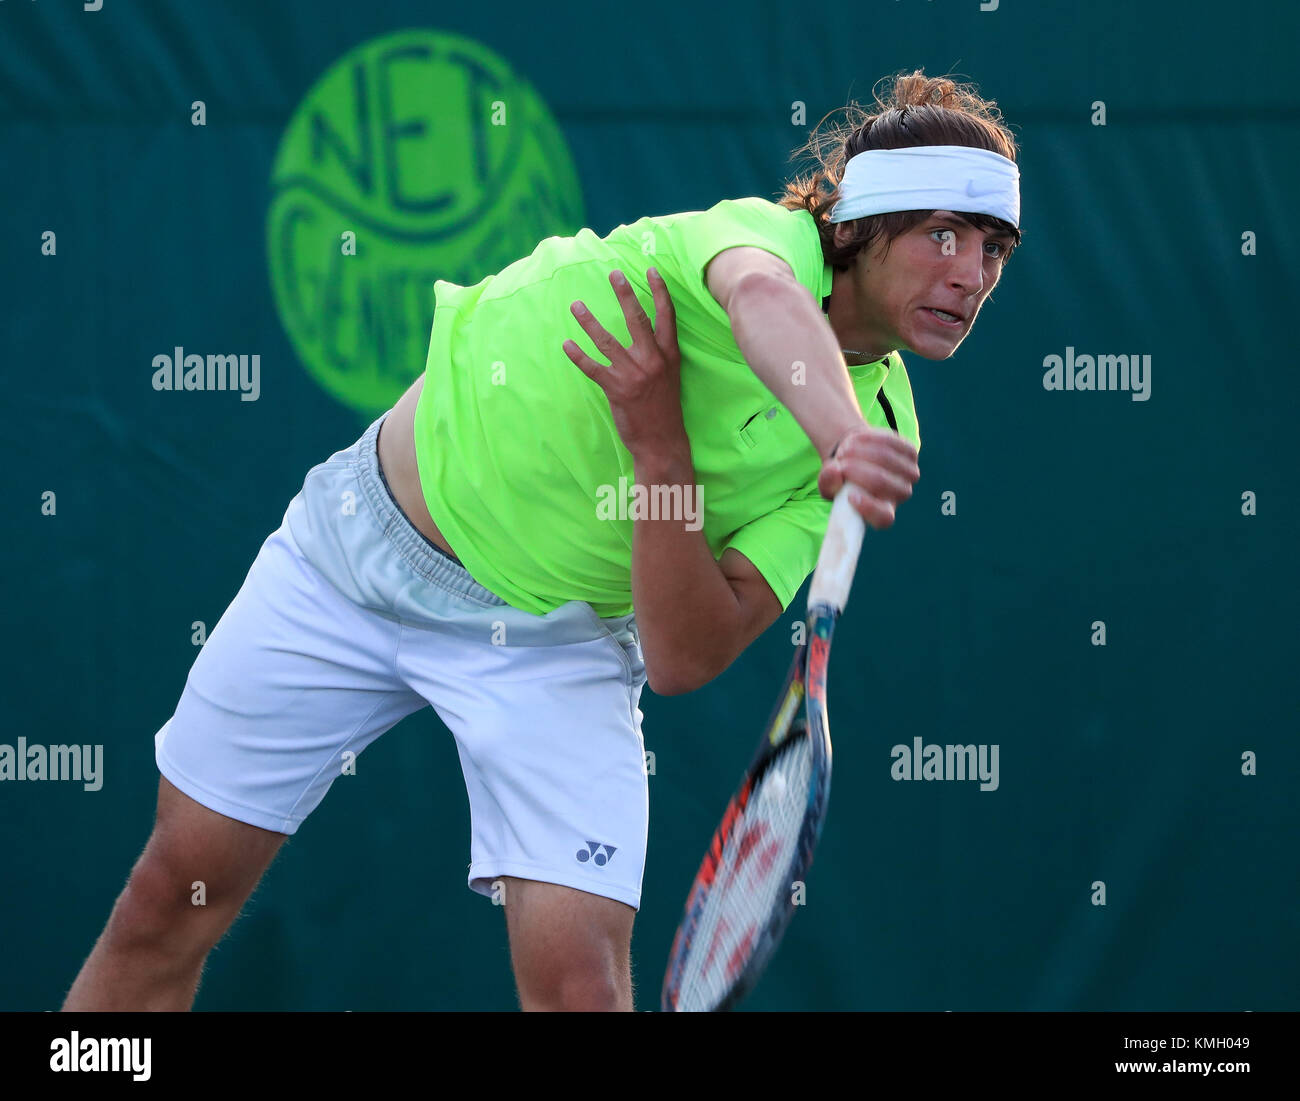 Plantation, Florida, USA. 07th Dec, 2017. Justin SCHLAGETER (GER) plays in the 2017 Orange Bowl International Tennis Championship elimination rounds of Boys 18s and under, played at the Frank Veltri Tennis Center in Plantation, Florida, USA. Mario Houben/CSM/Alamy Live News Stock Photo